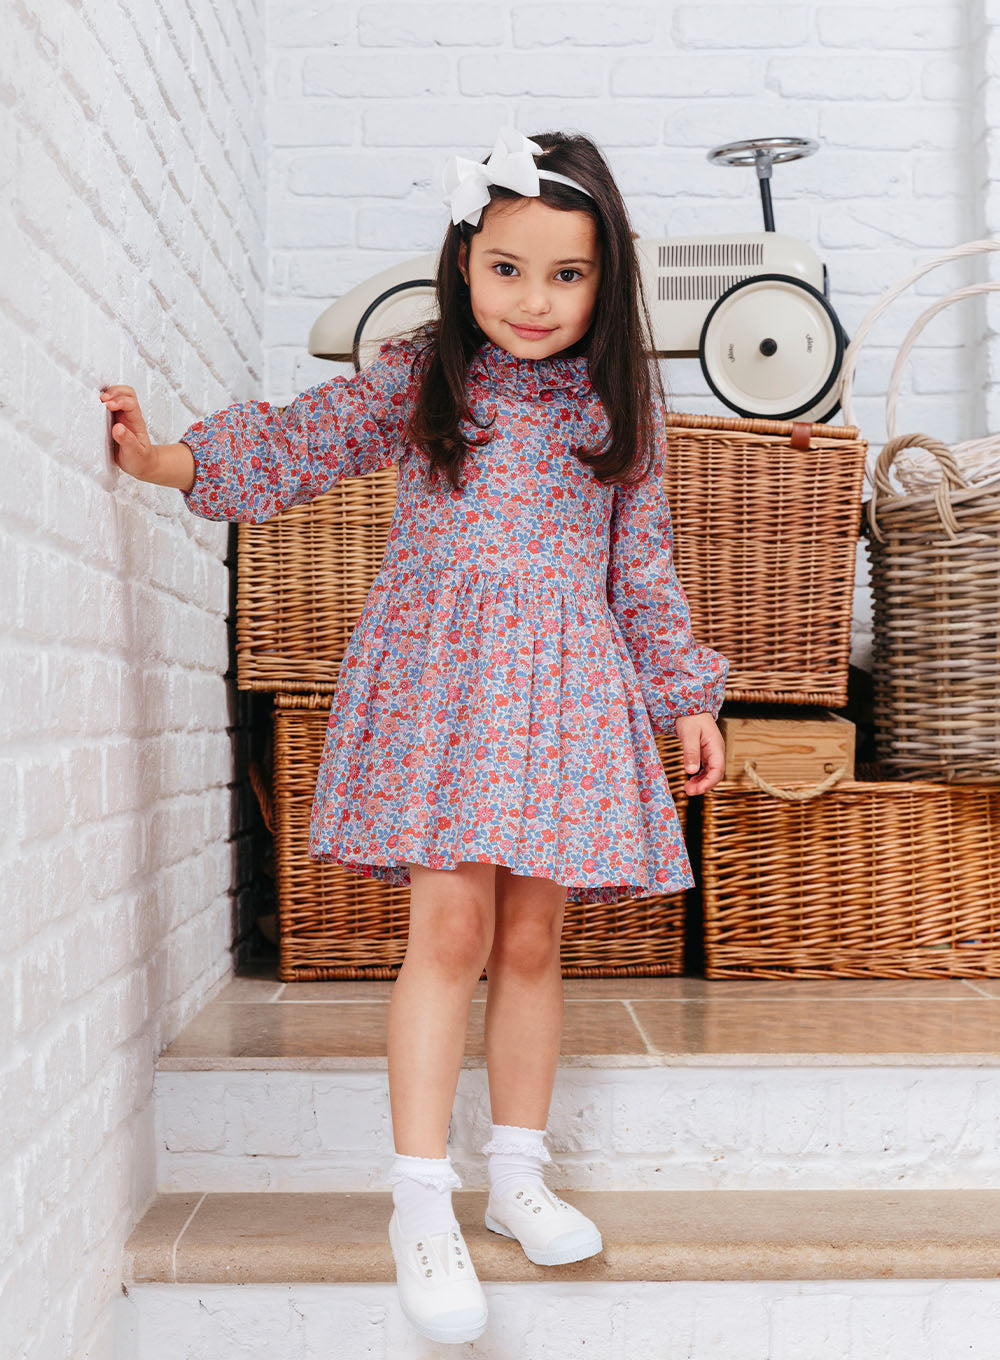 Shop All Girls' Clothing and Accessories | Trotters Childrenswear –  Trotters Childrenswear USA